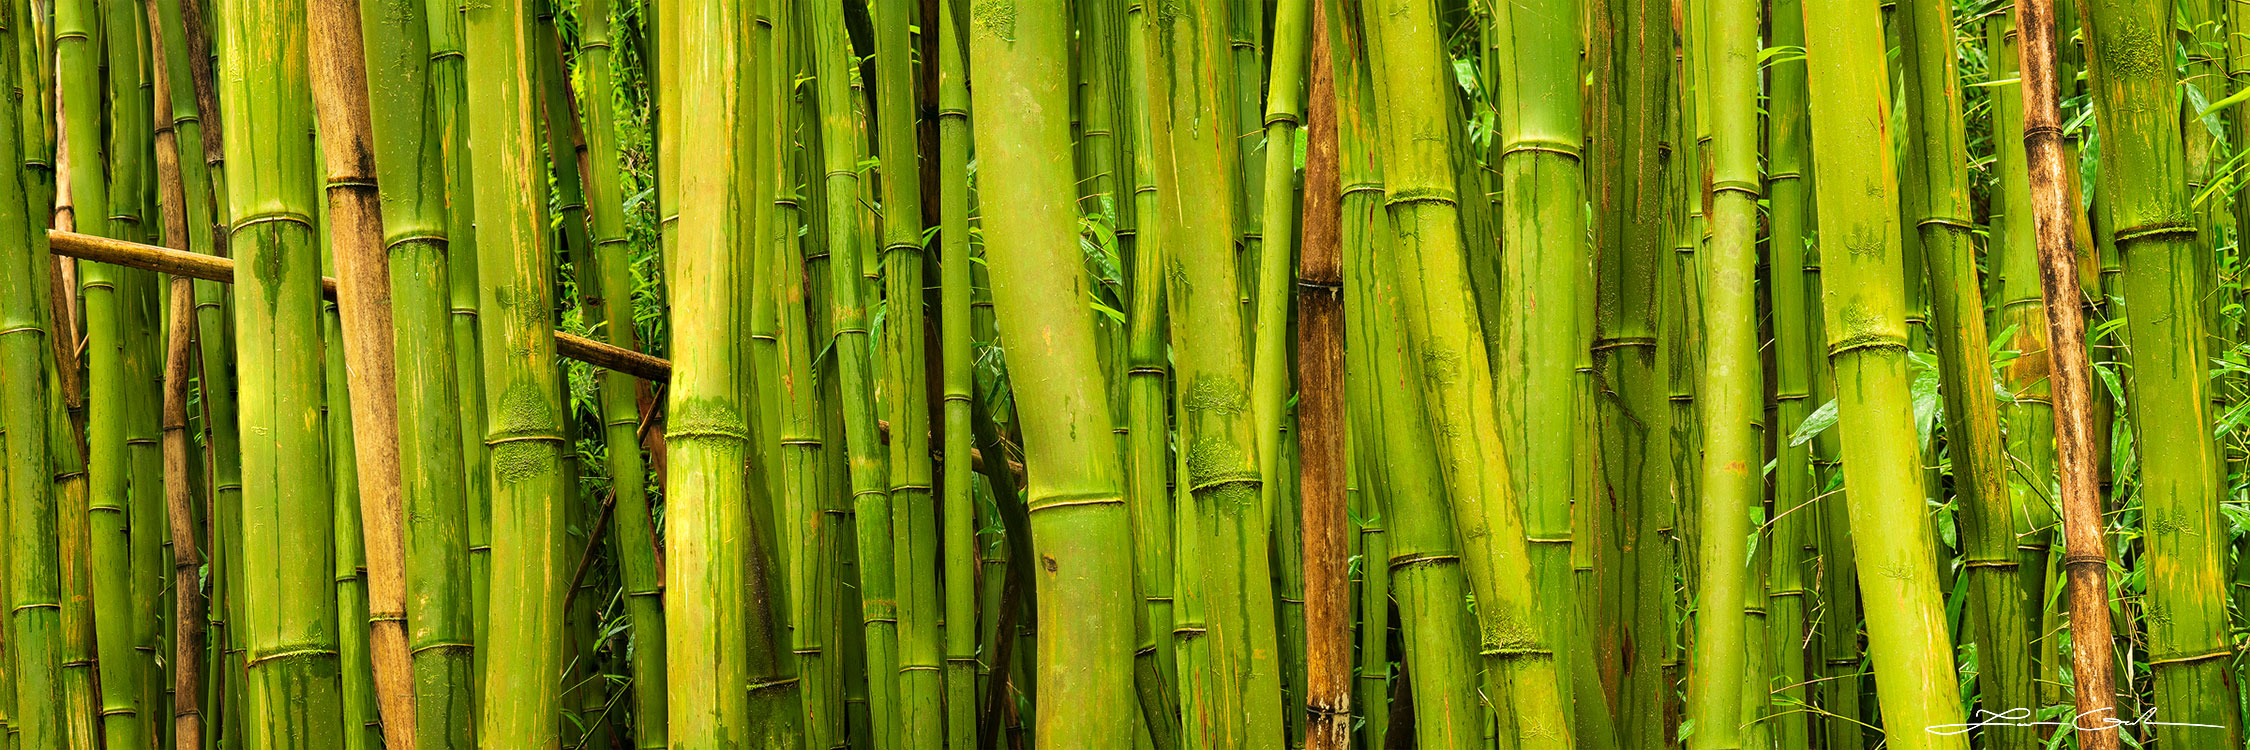 Pano photo art print featuring a close-up of an almost impenetrable green bamboo wall in Maui - Gintchin Fine Art.